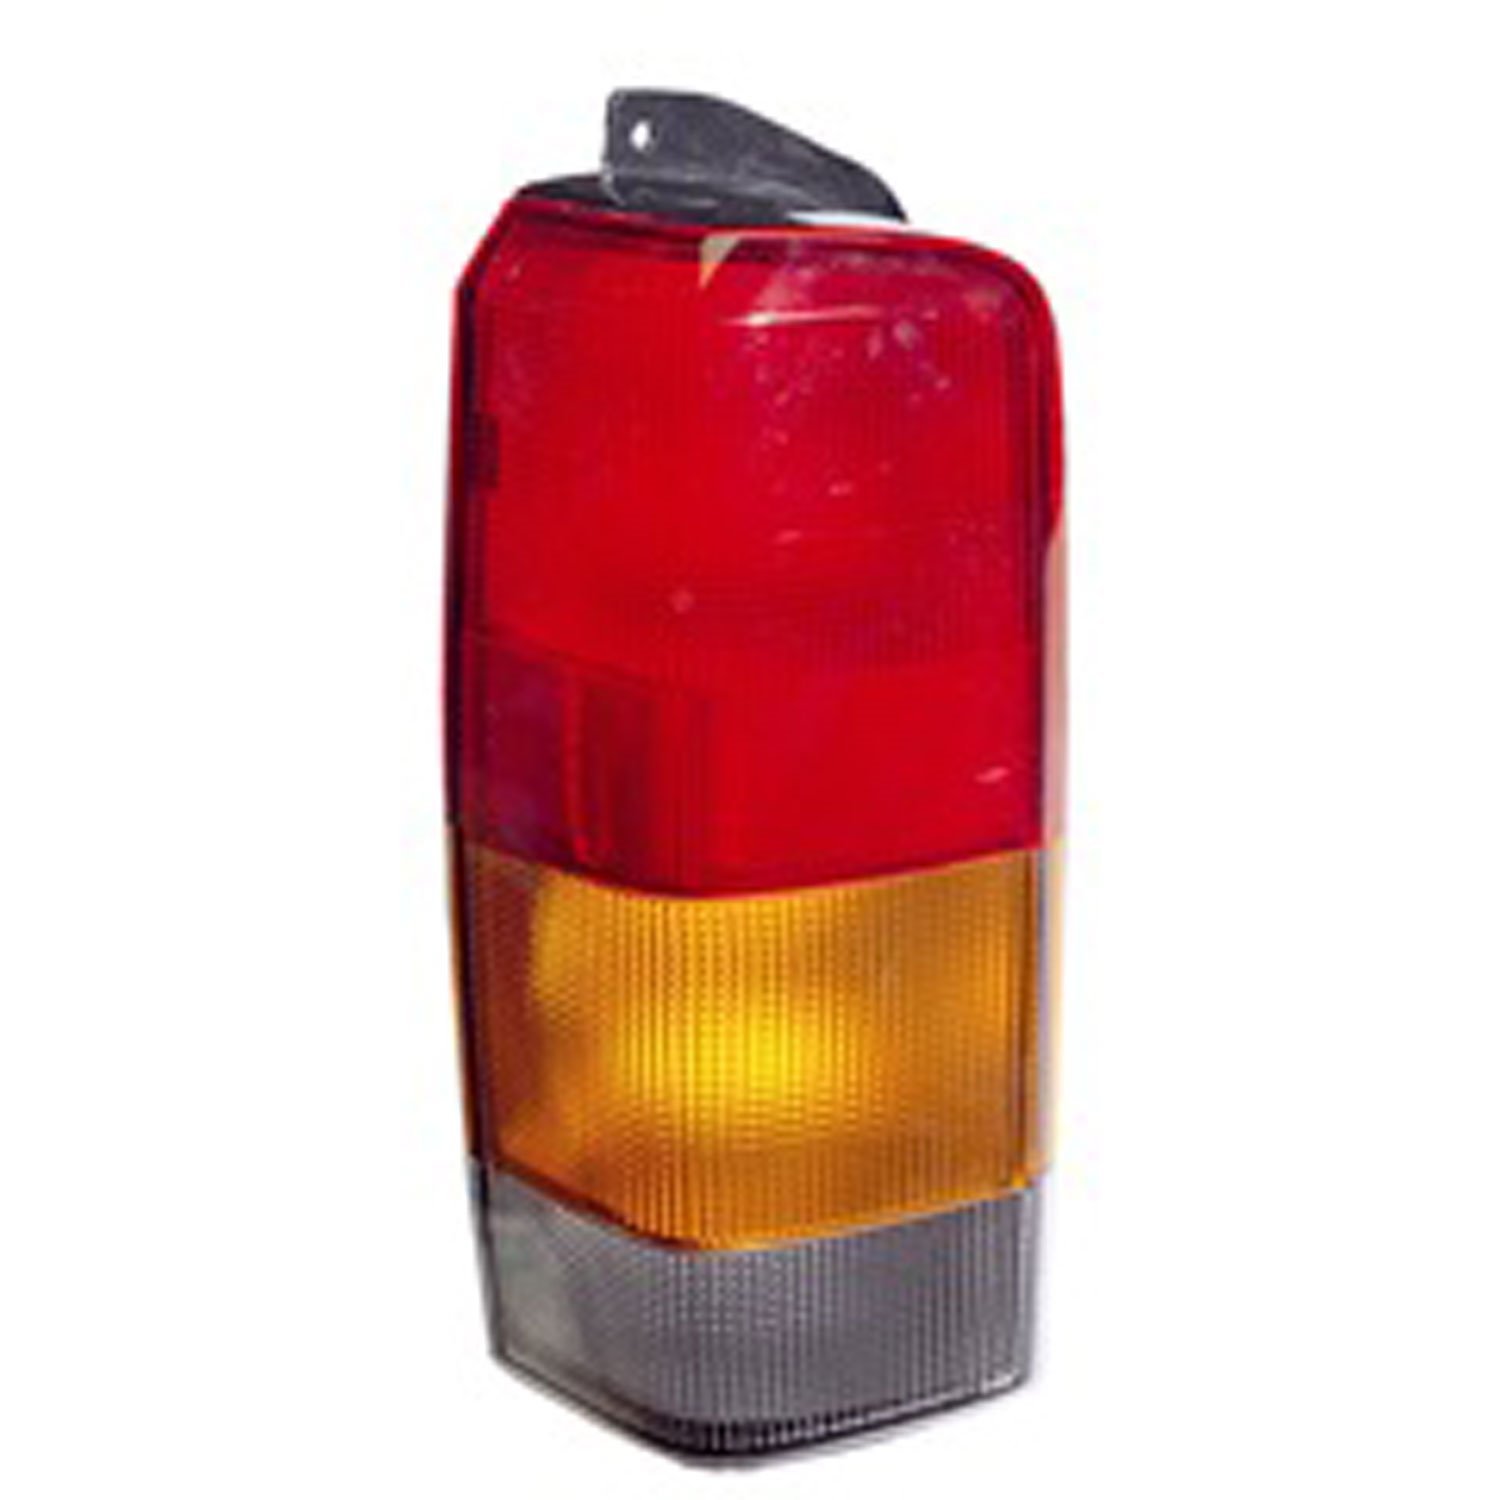 Replacement tail light assembly from Omix-ADA, Fits left side of 97-01 Jeep Cherokee XJ